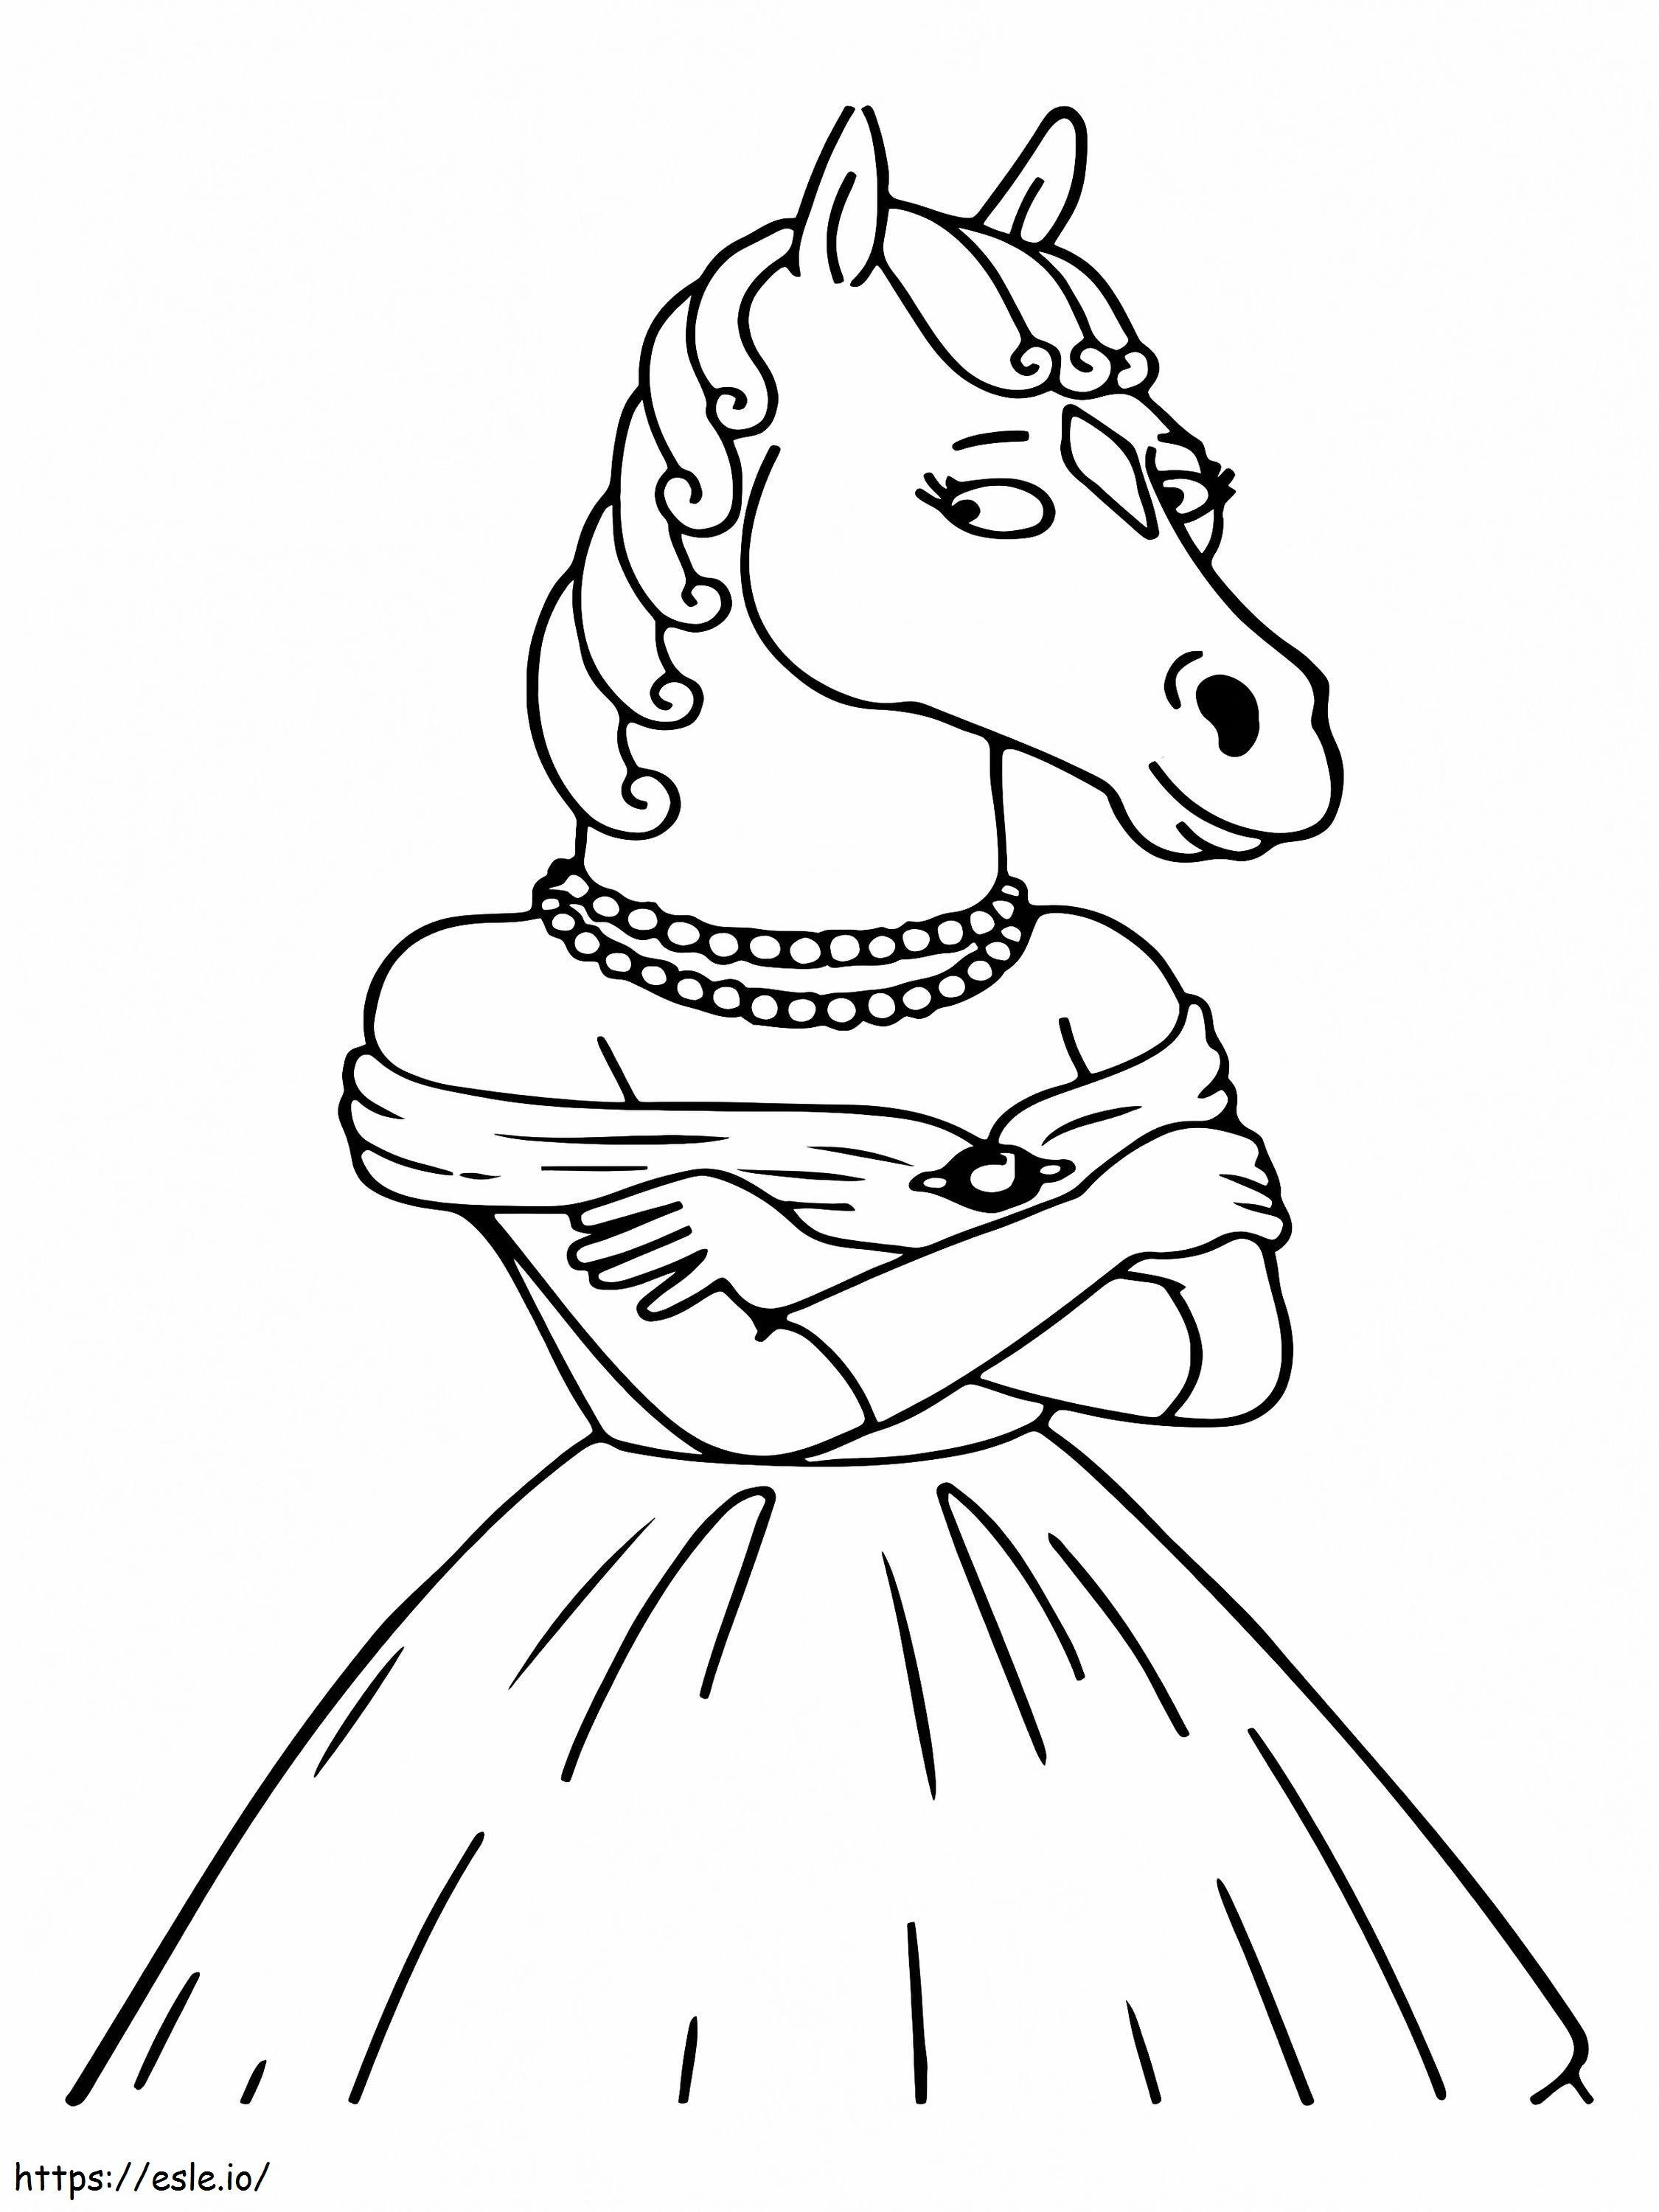 Fashionable Beatrice Horseman coloring page